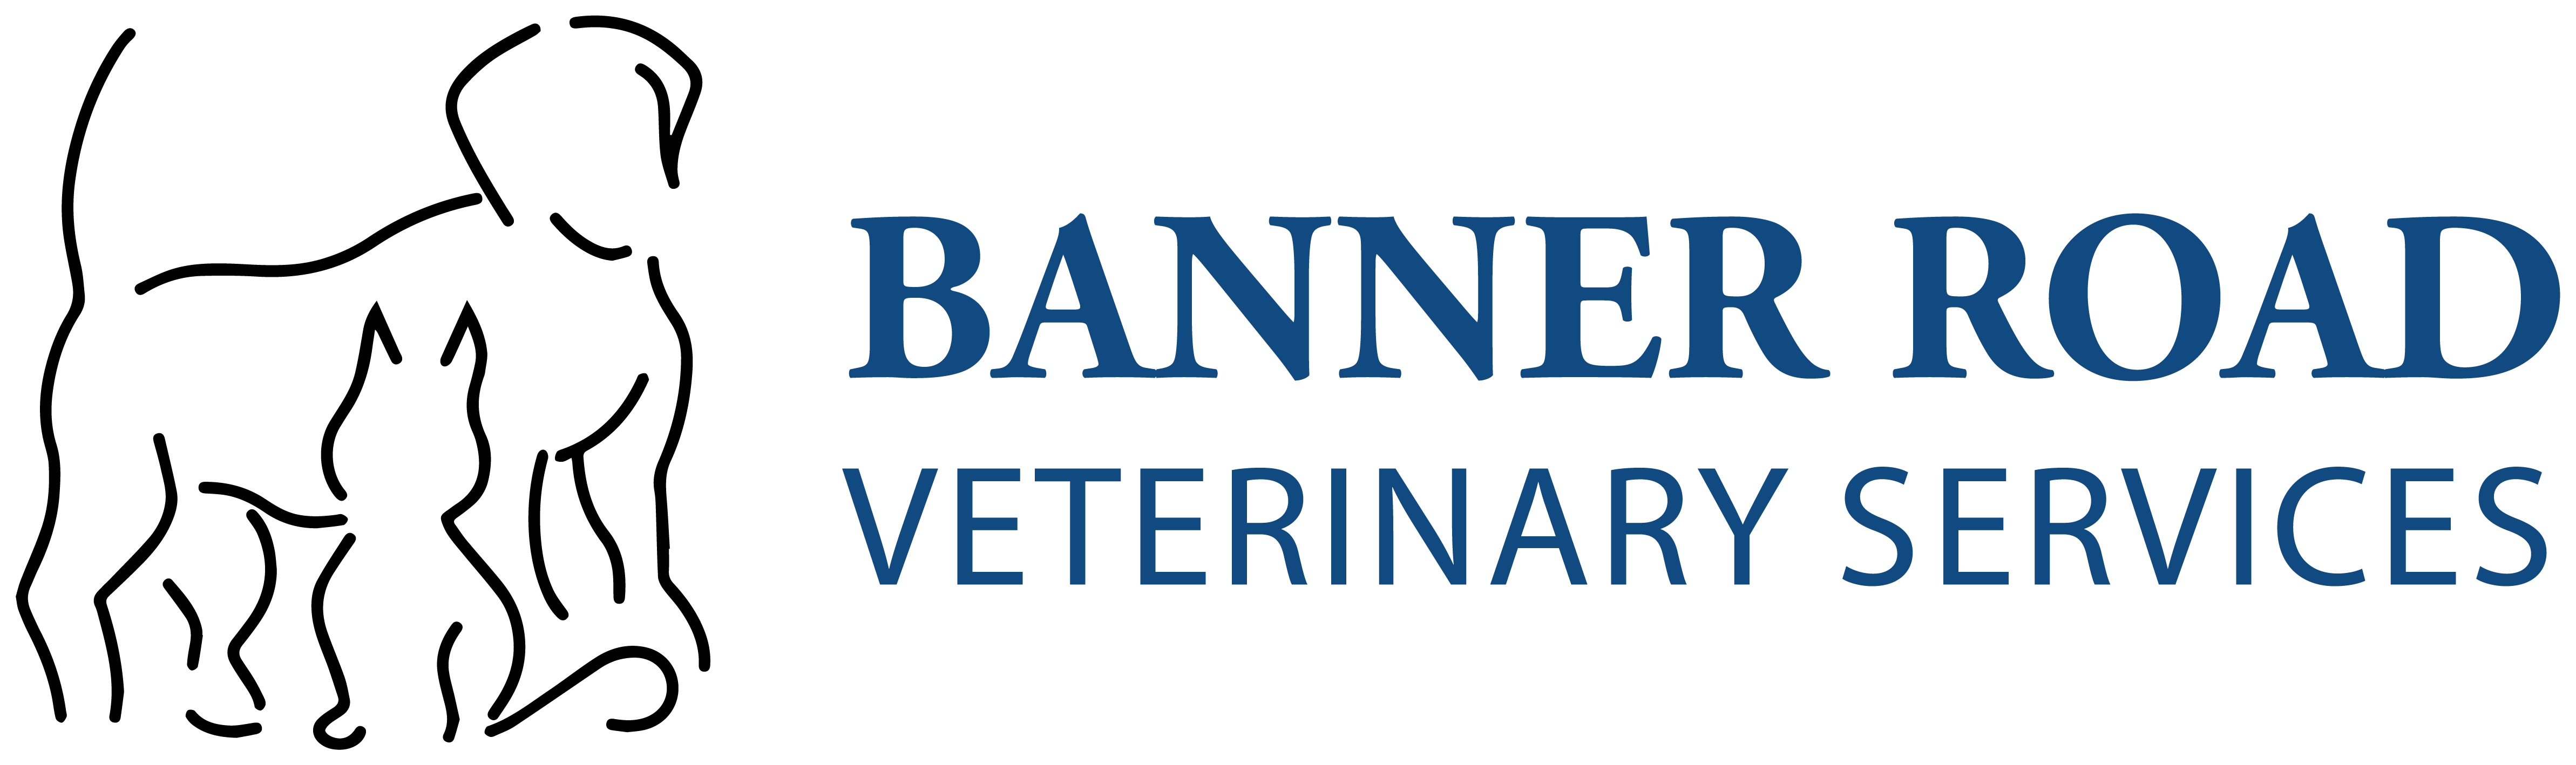 Banner Road Veterinary Services